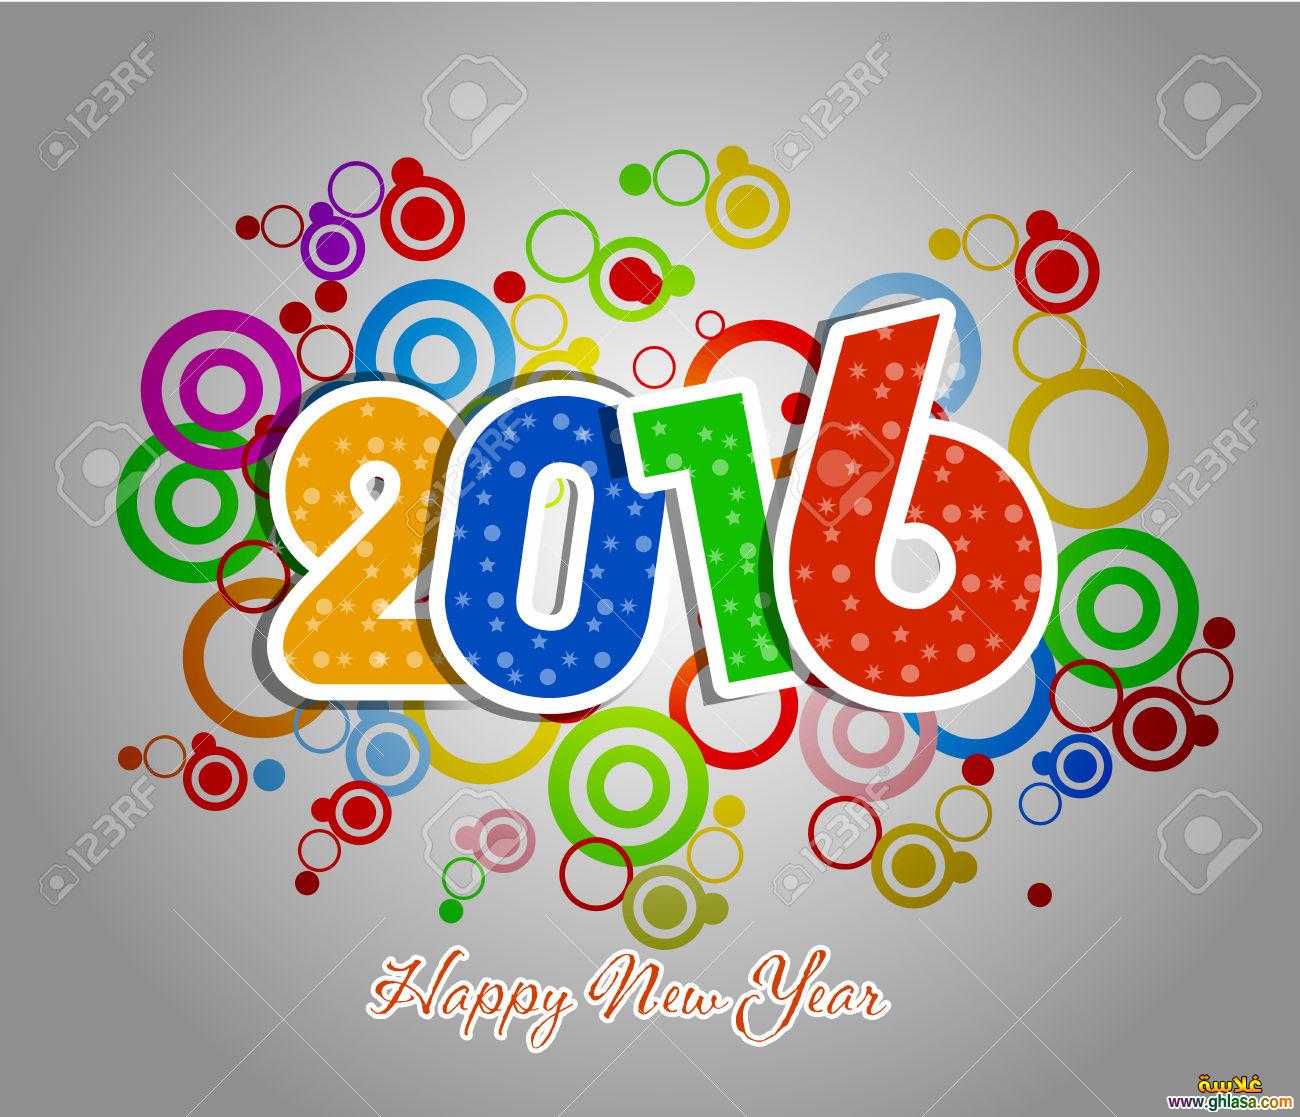     2024 - 2025      2024 - 2025  happy-new-year-2024 - 2025 do.php?img=61676